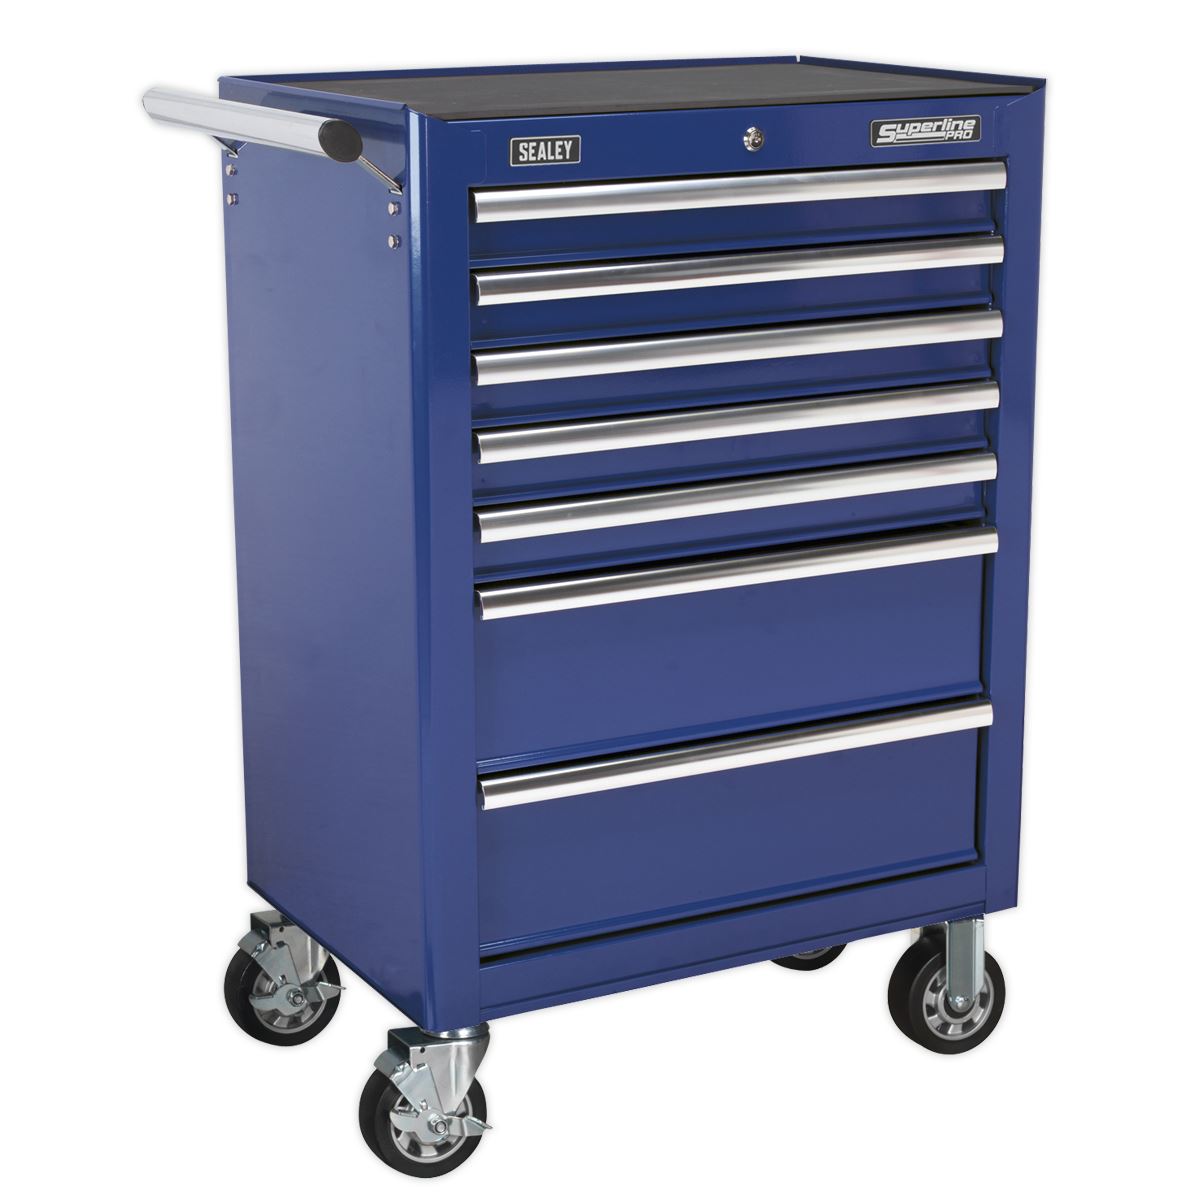 Sealey Superline Pro Rollcab 7 Drawer with Ball-Bearing Slides - Blue